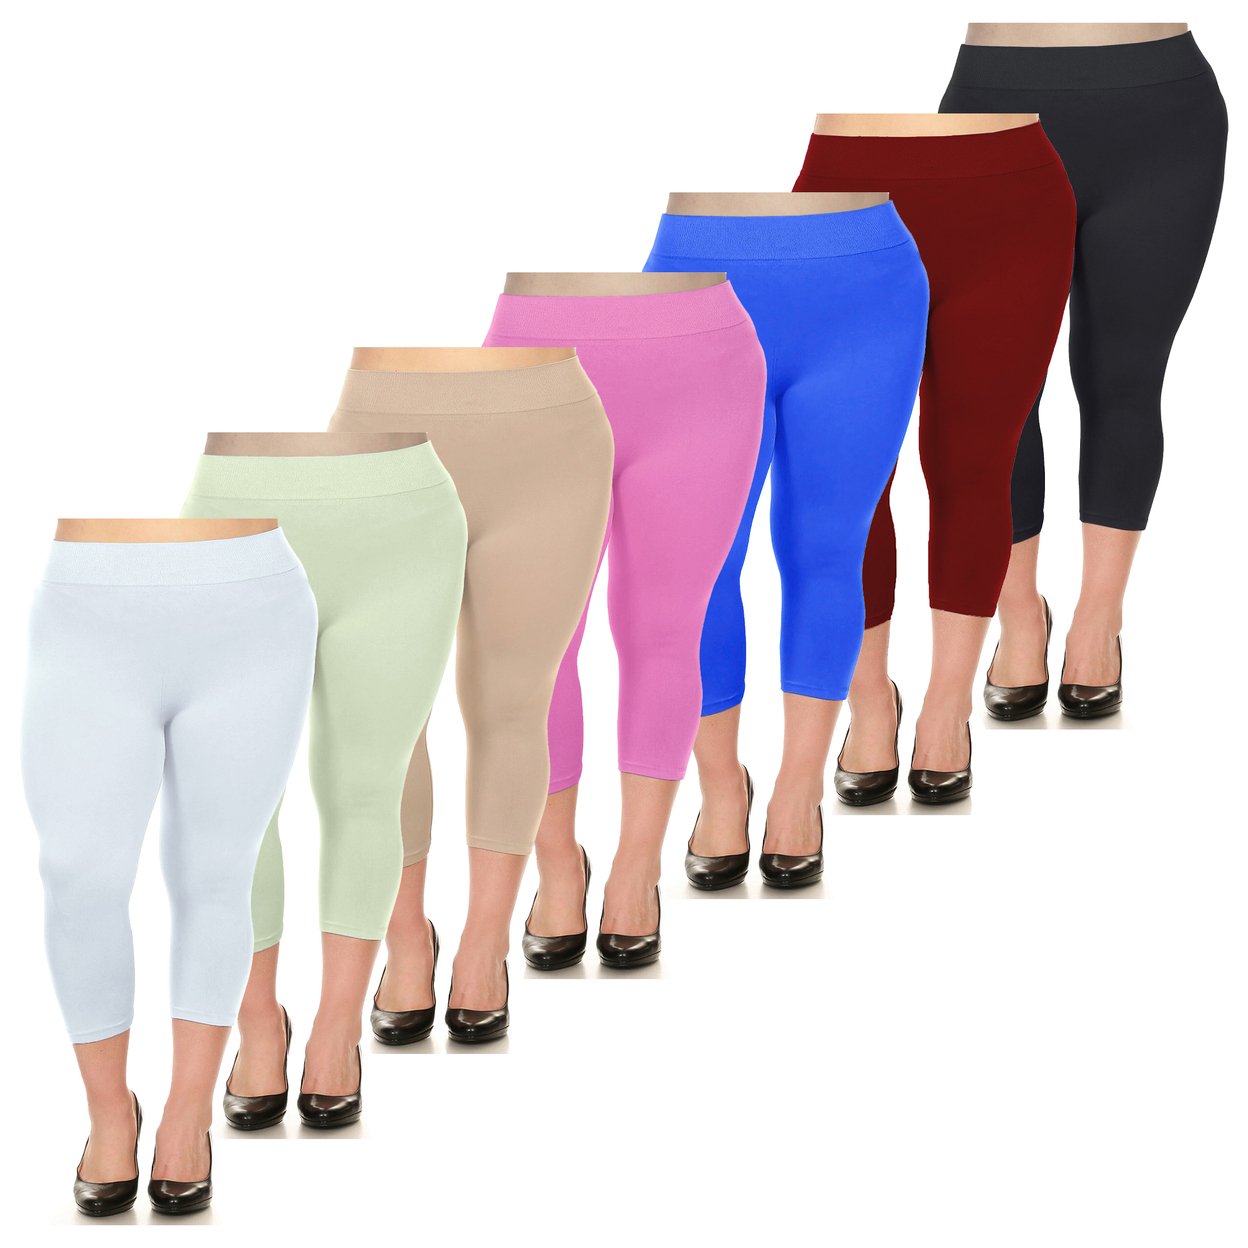 2-Pack: Women's Ultra-Soft High Waisted Smooth Stretch Active Yoga Capri Leggings Plus Size Available - Beige & Beige, 4x